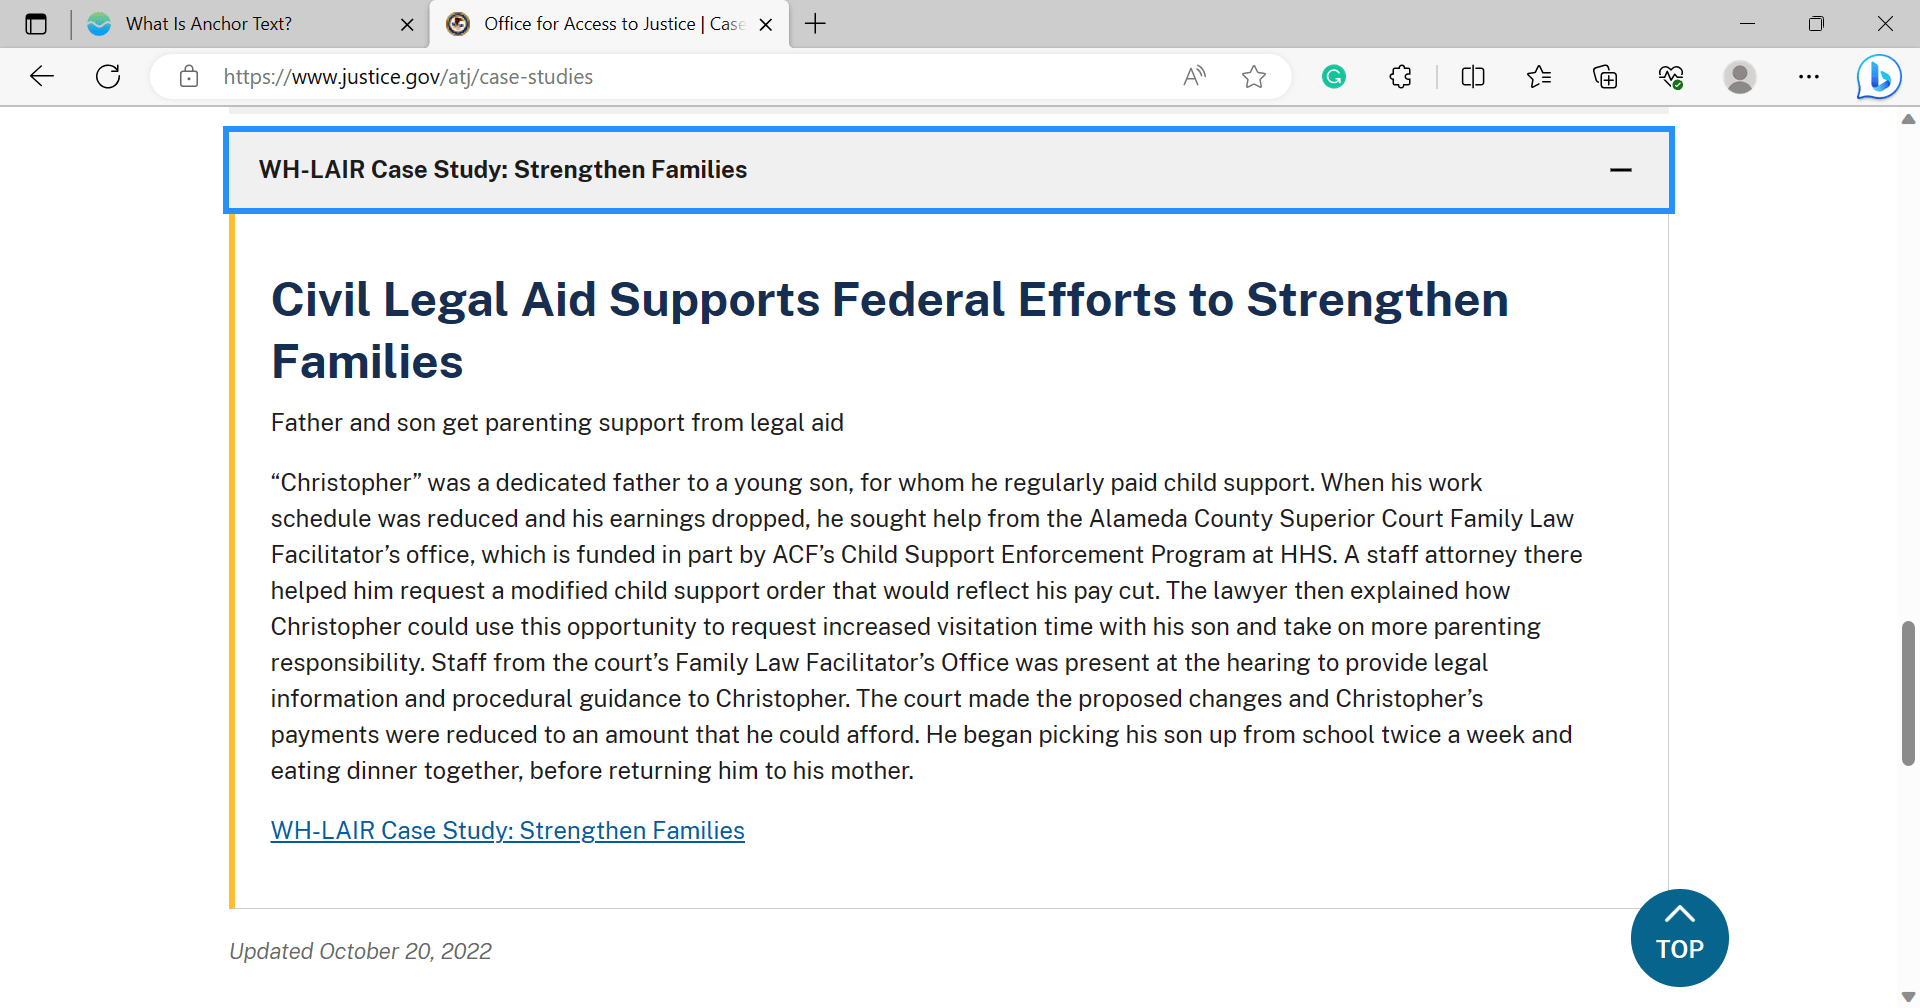 Case Study about Civil Legal Aid Supports Federal Efforts to Strengthen Families